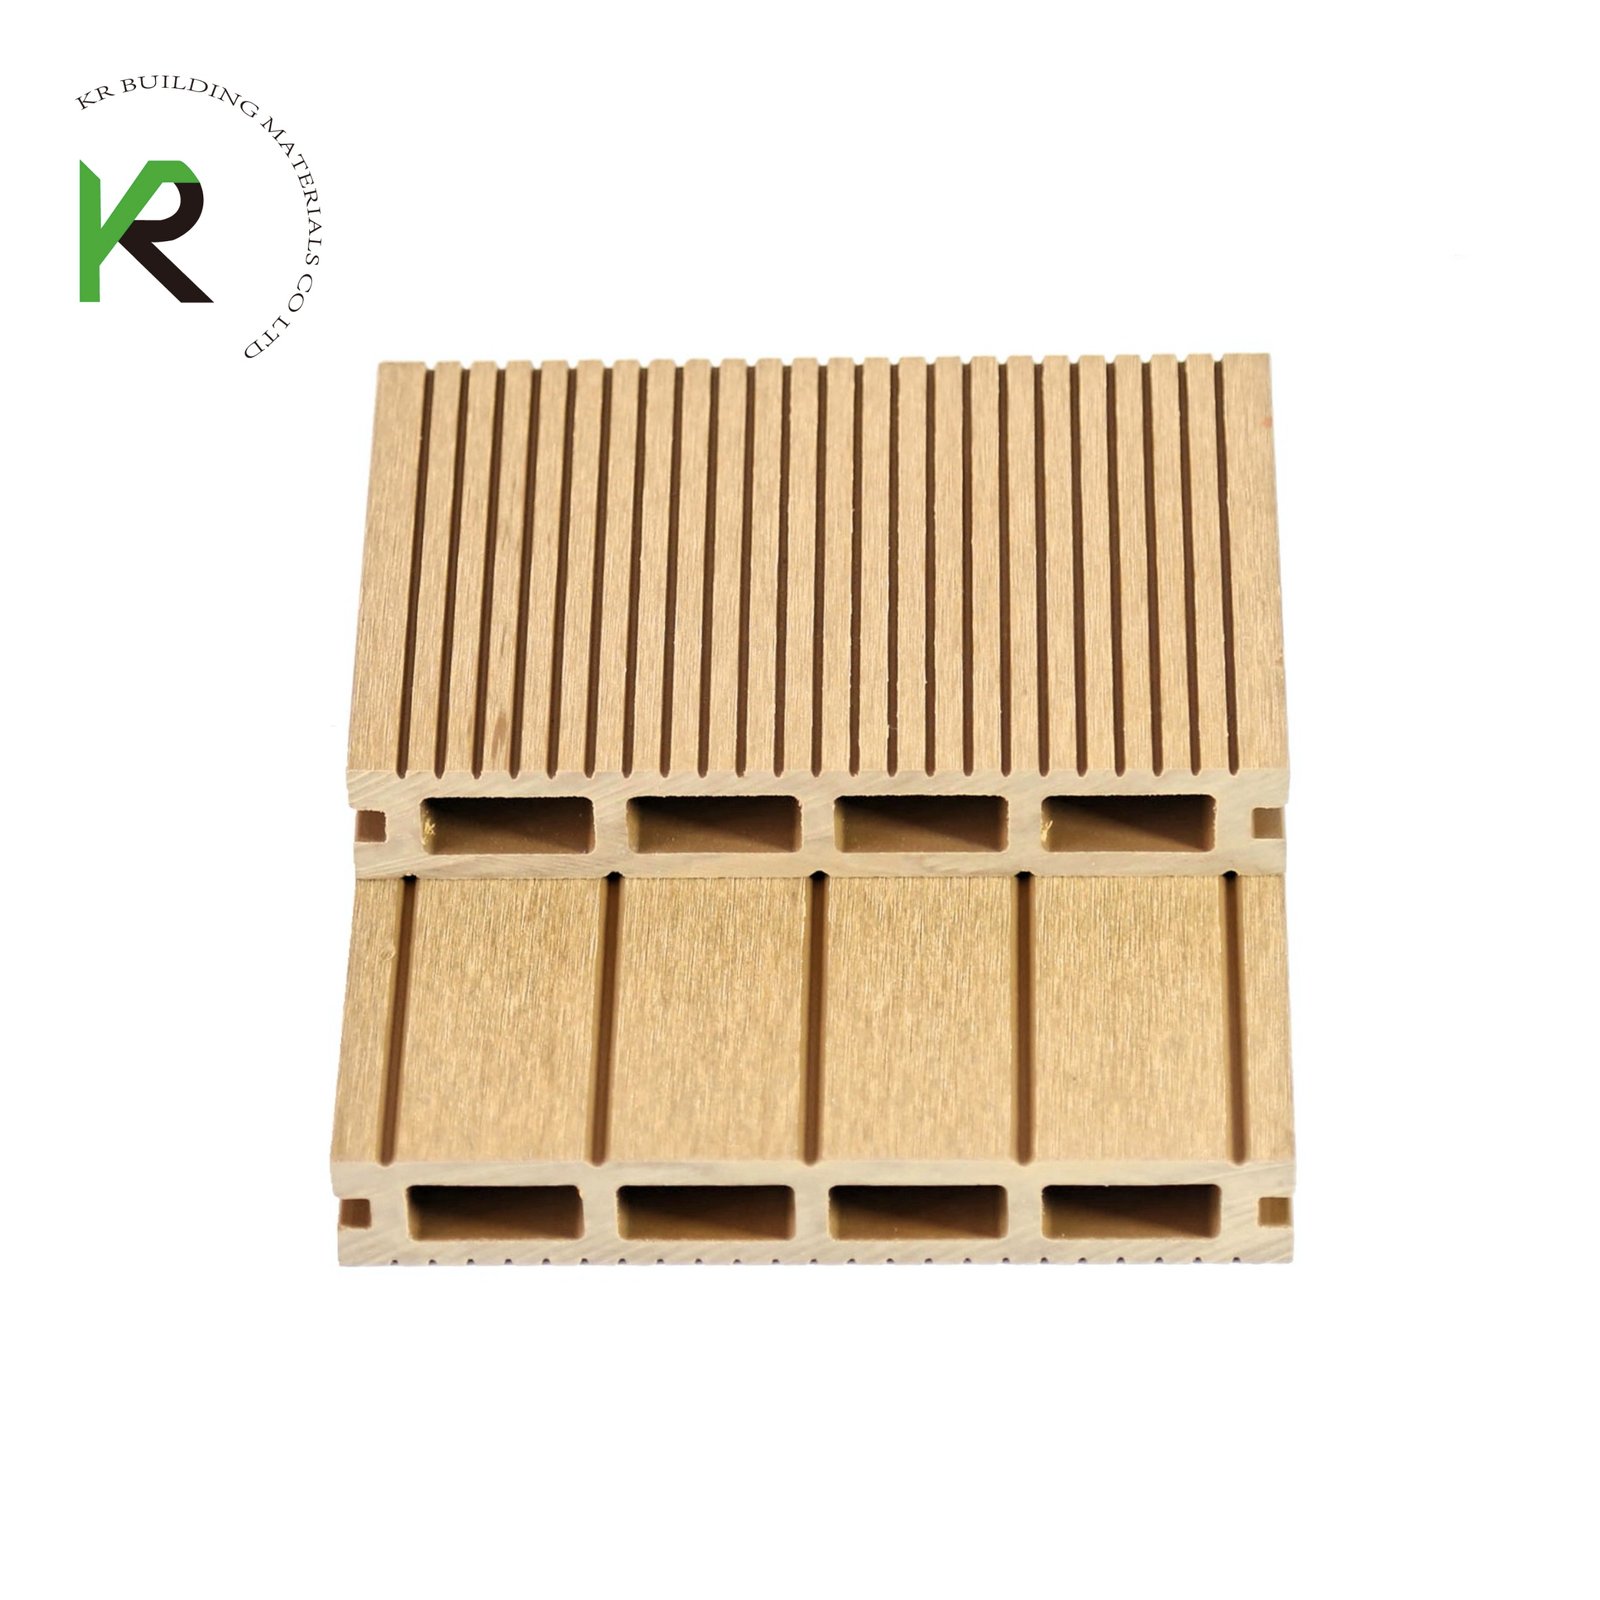 WPC hollow decking cheap price 146x24mm